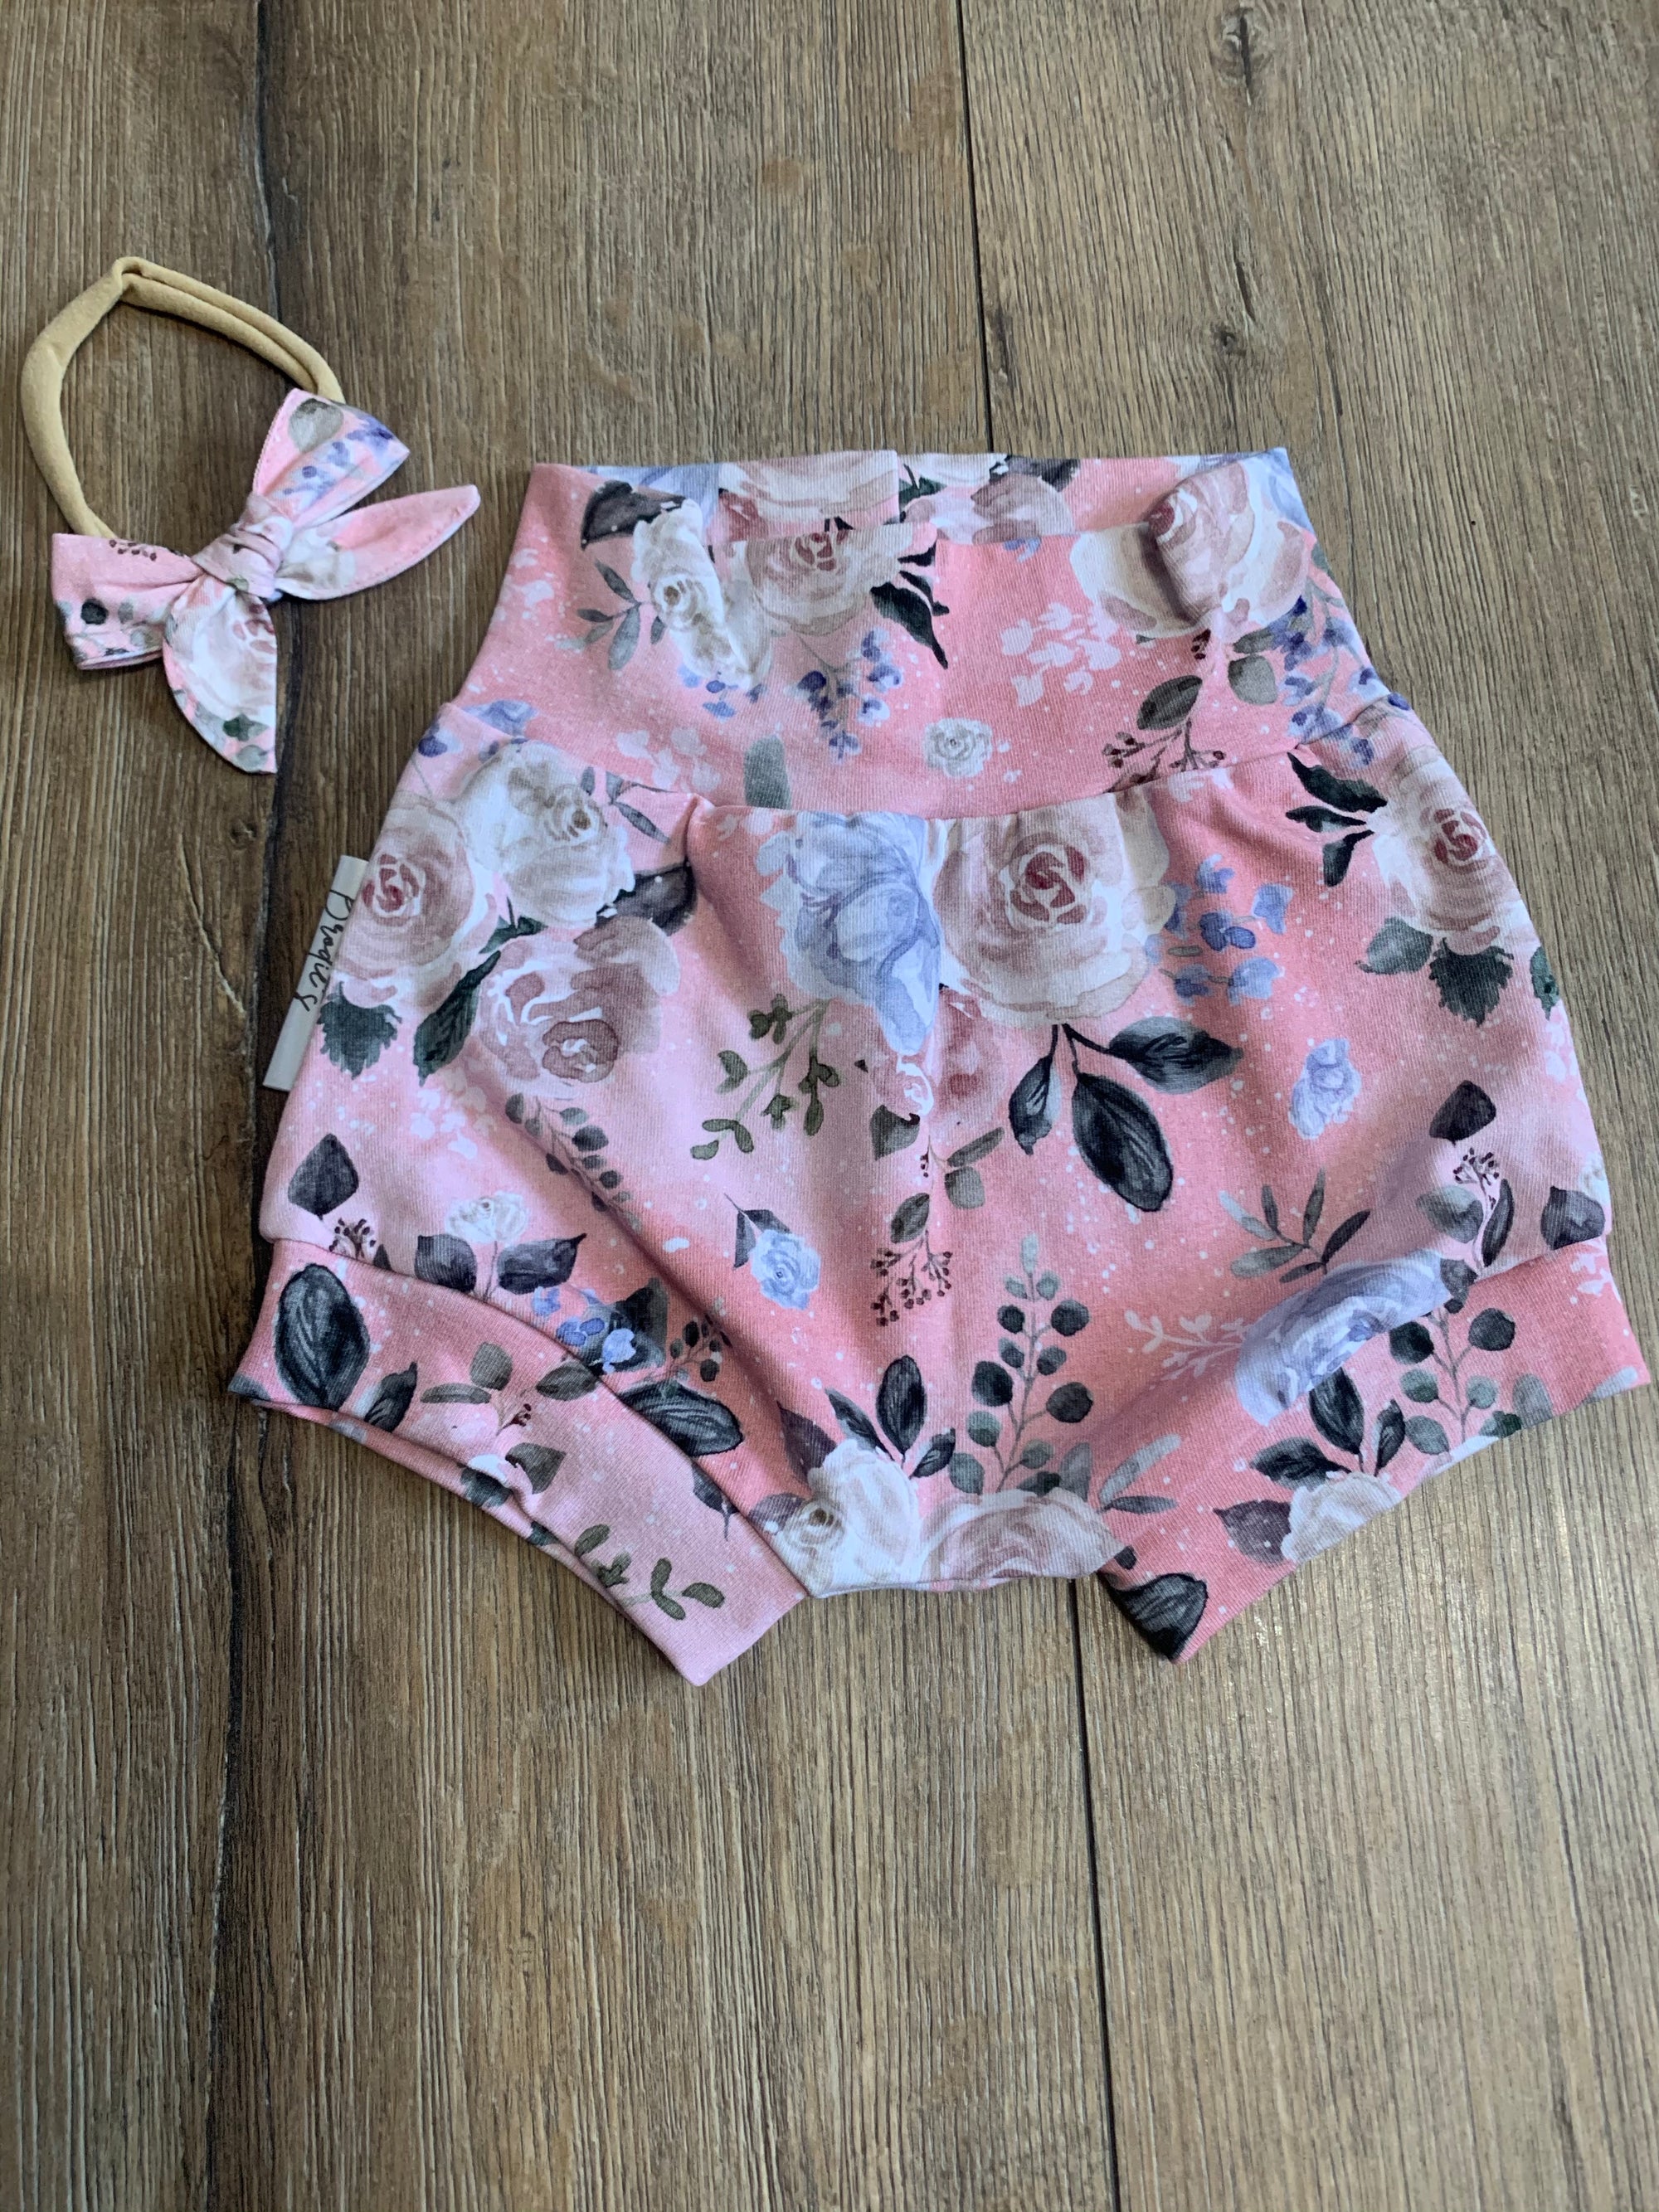 Handmade Pink Shorties and Bow Set